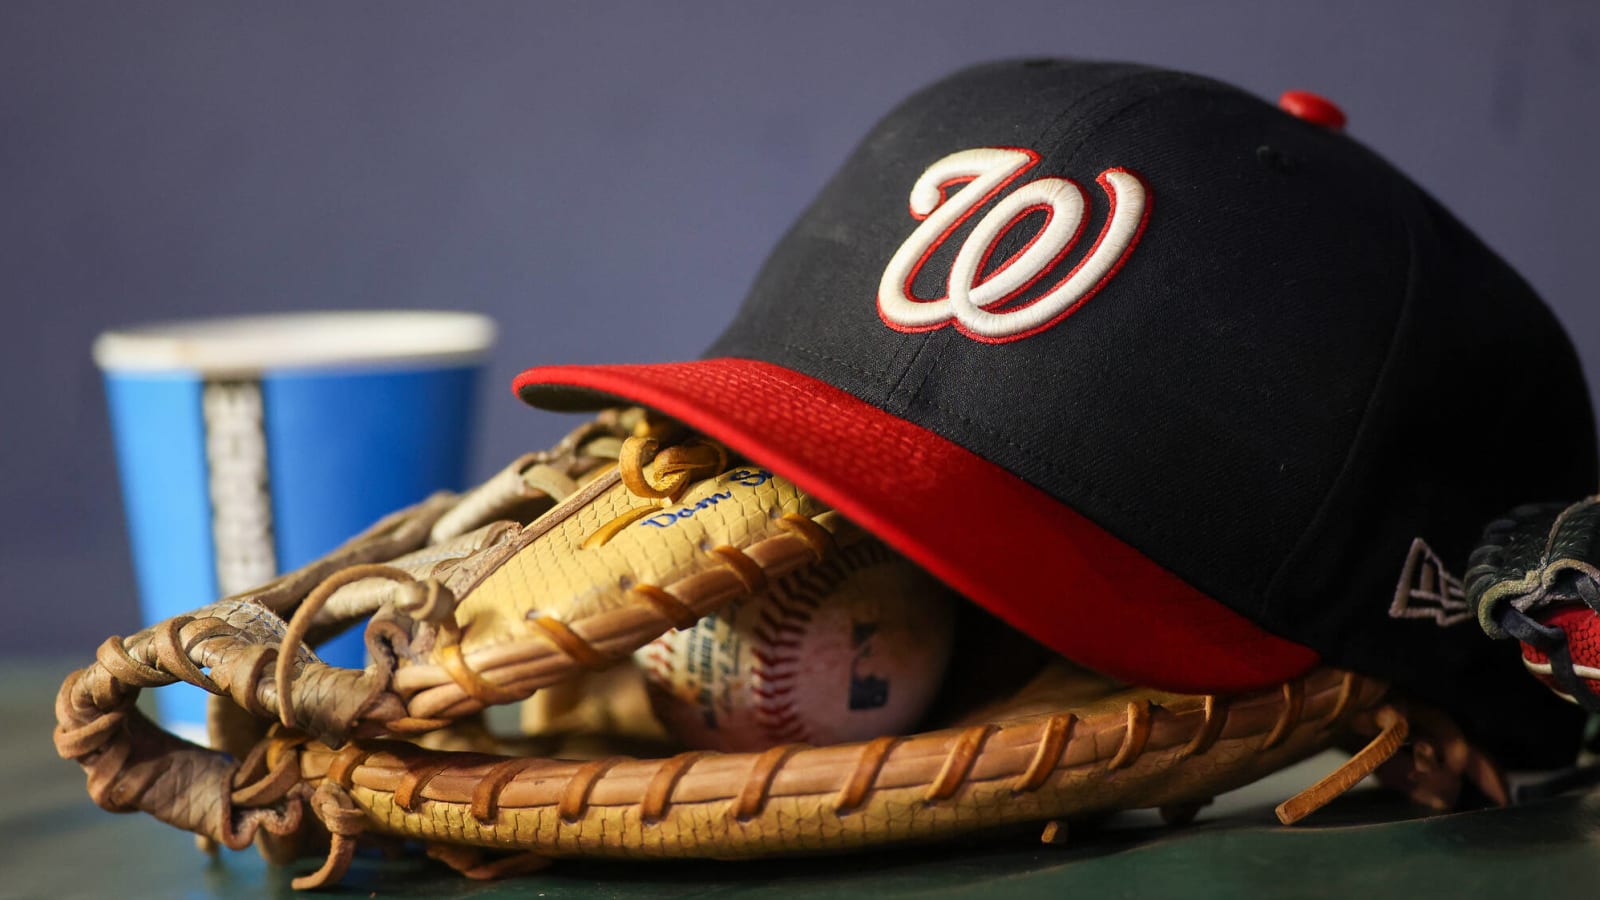 Nationals shore up scouting staff